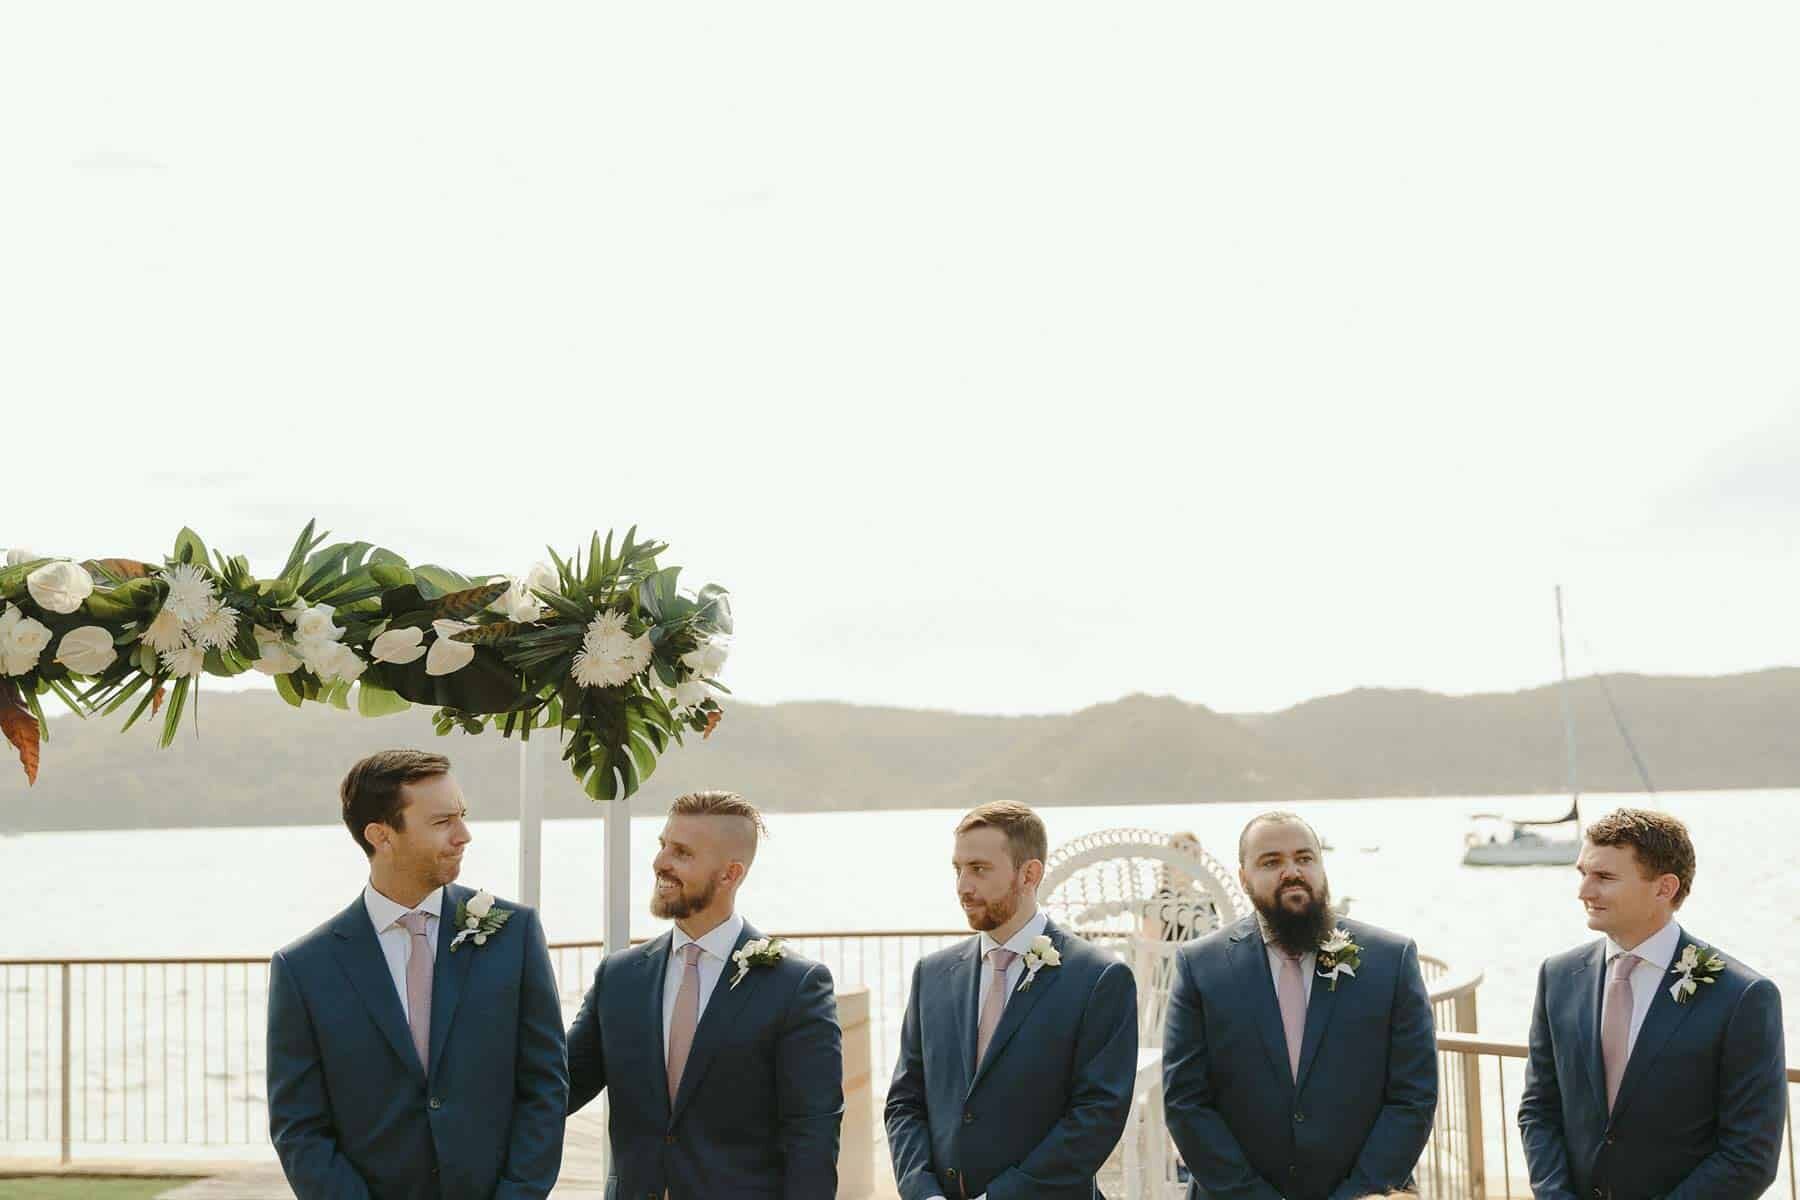 Matching groom and groomsmen in navy suits at beach wedding